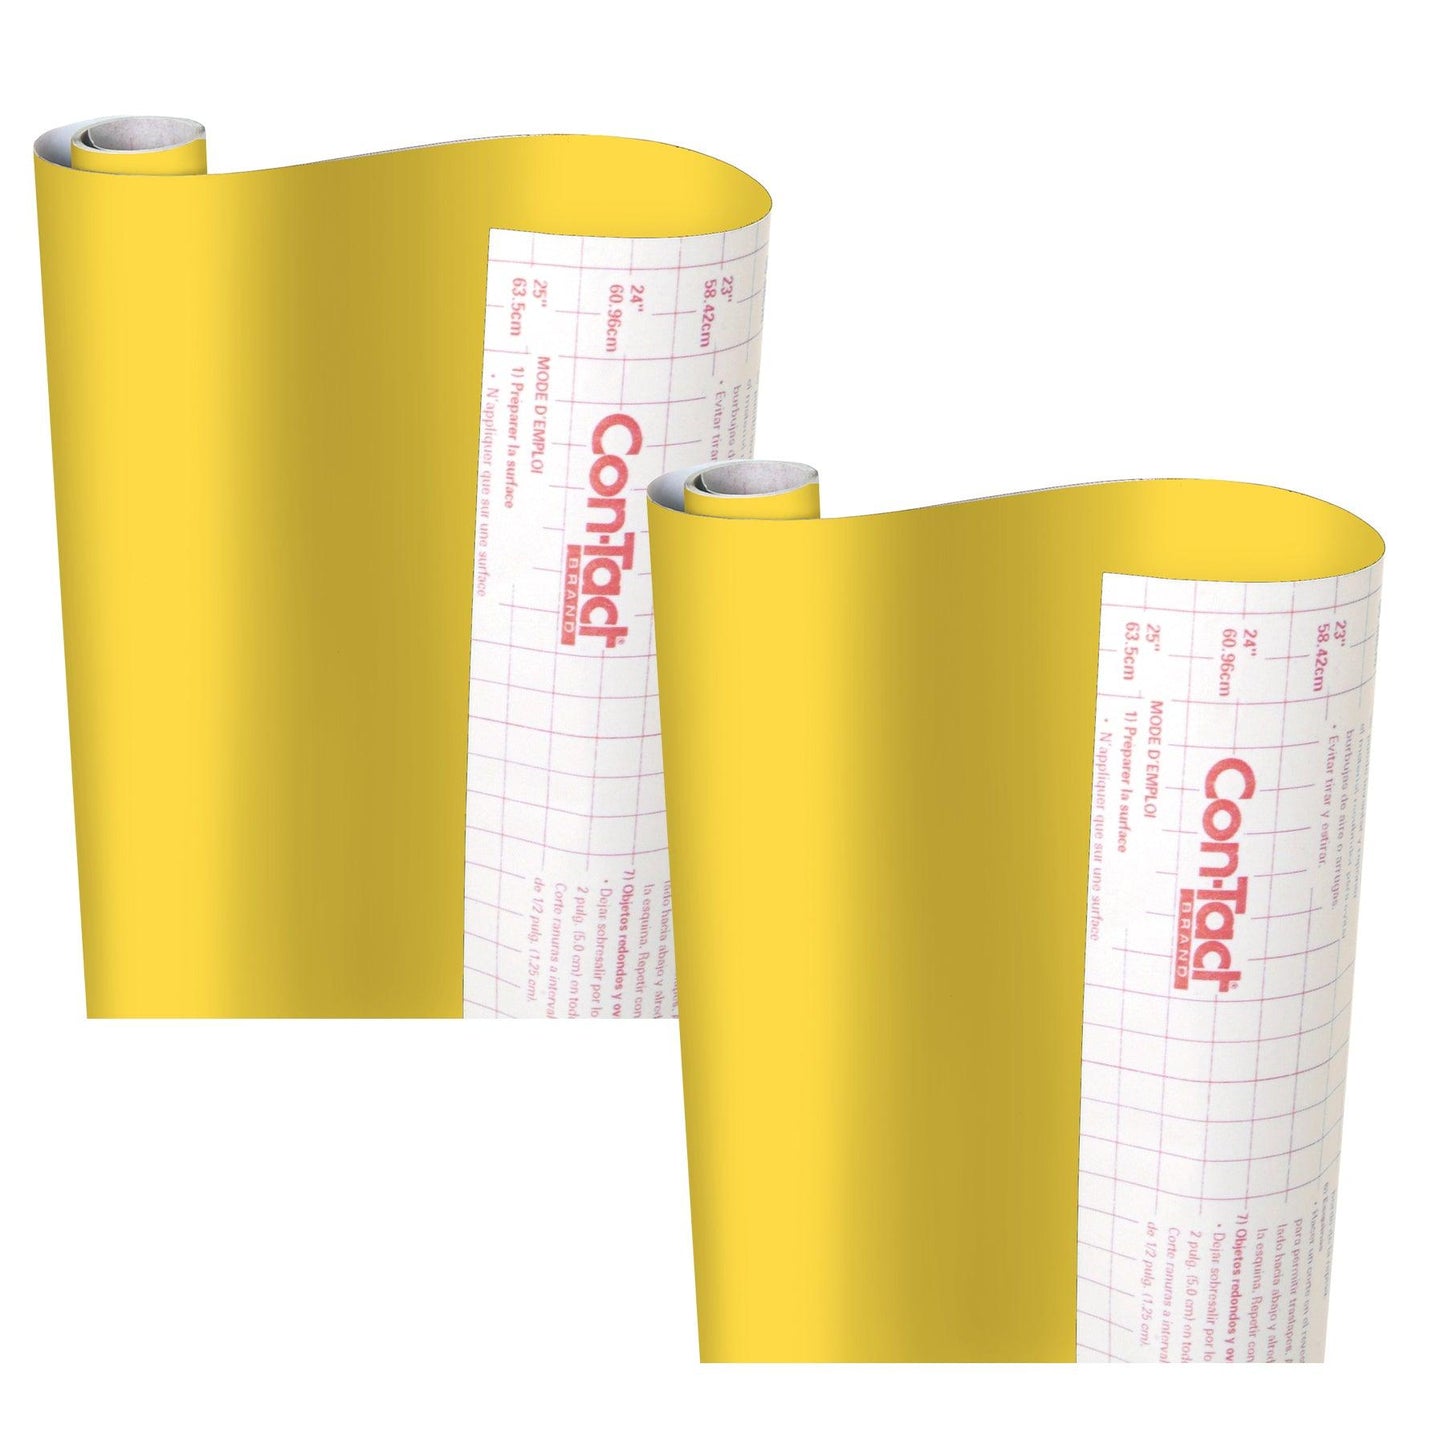 Creative Covering™ Adhesive Covering, Yellow, 18" x 16 ft, Pack of 2 - Loomini